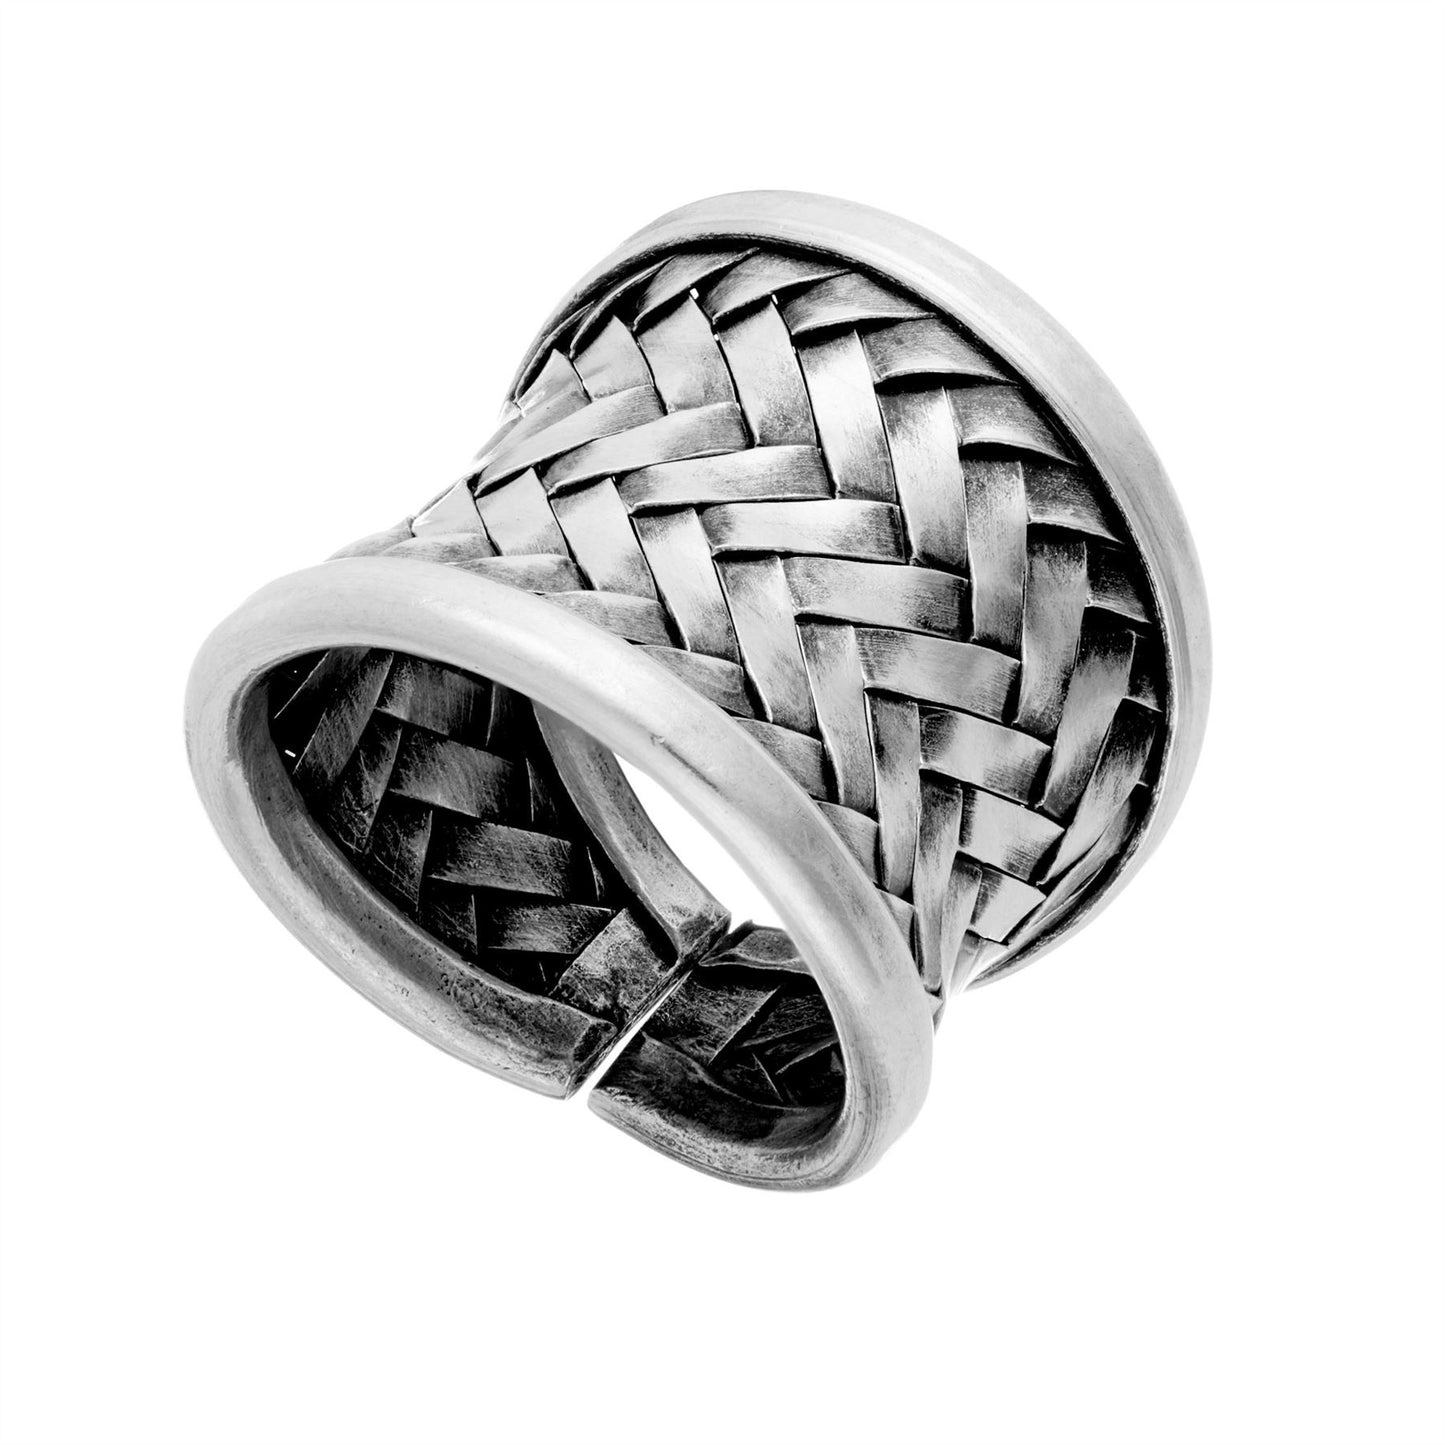 Hill Tribe Silver Woven Wide Band Adjustable Ring Thumb & Fingers